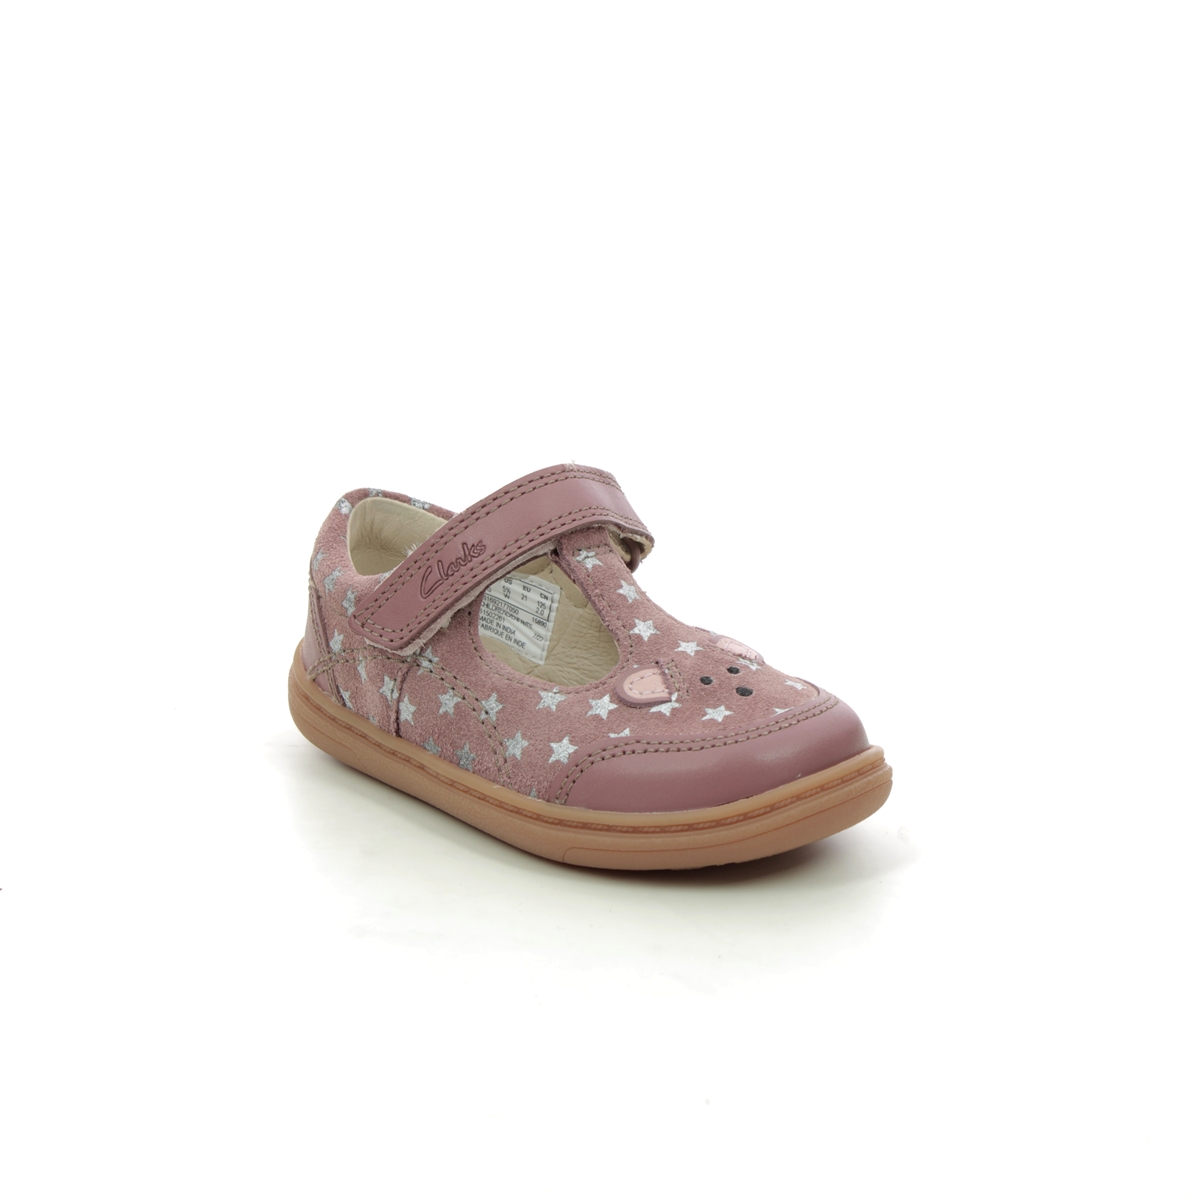 Clarks Flash Mouse T Pink Suede Kids First And Toddler 692177G In Size 4 In Plain Pink Suede G Width Fitting For kids